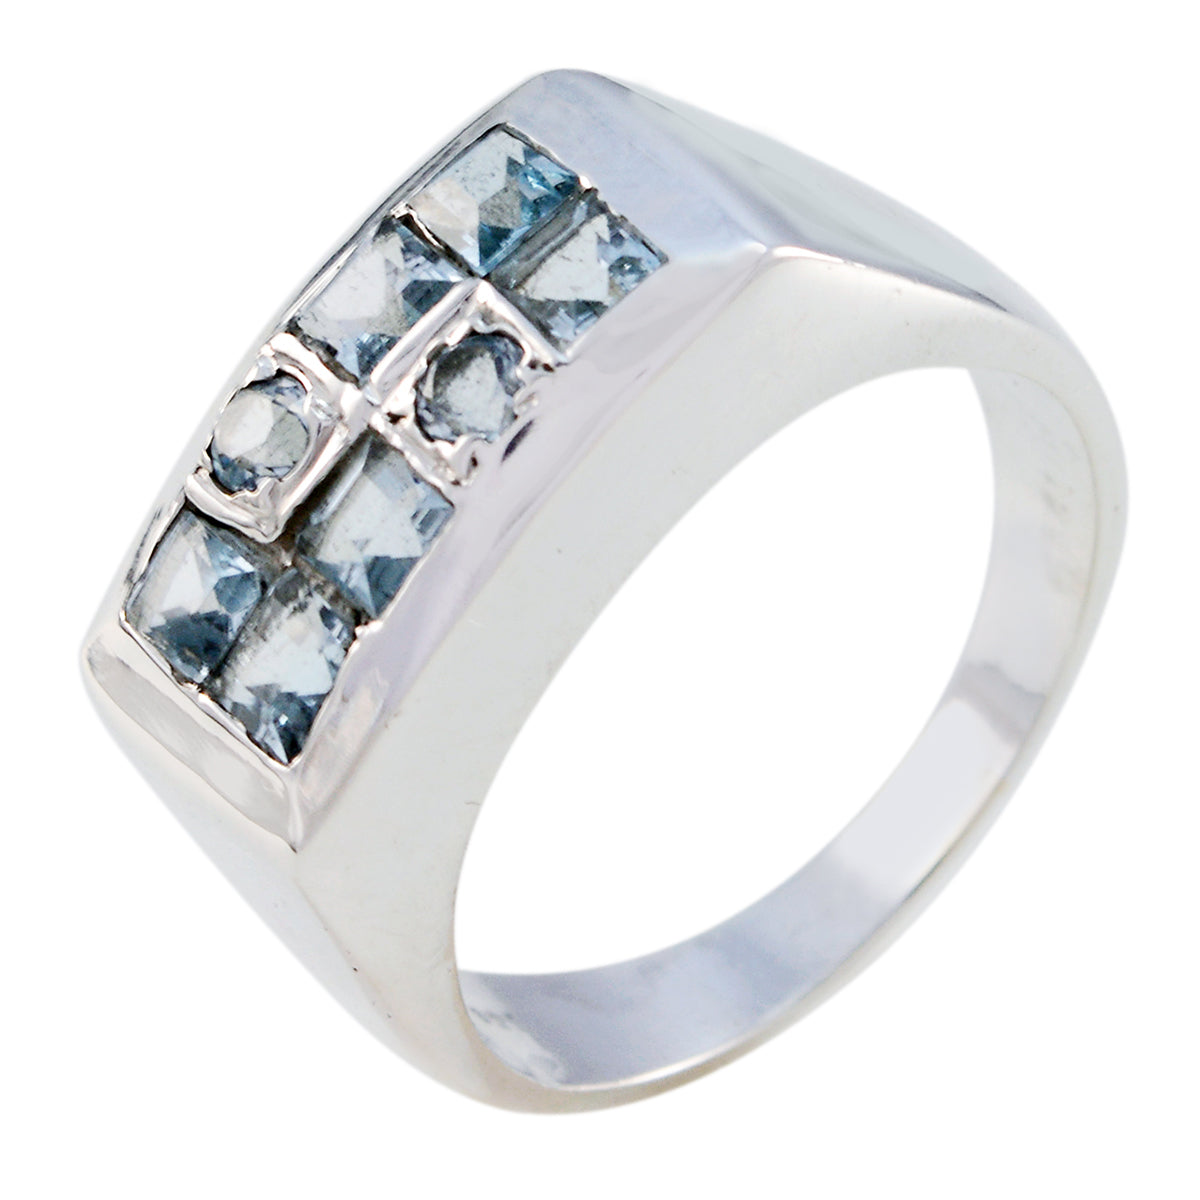 Riyo Captivating Gemstone Blue Topaz Solid Silver Rings Labour Day